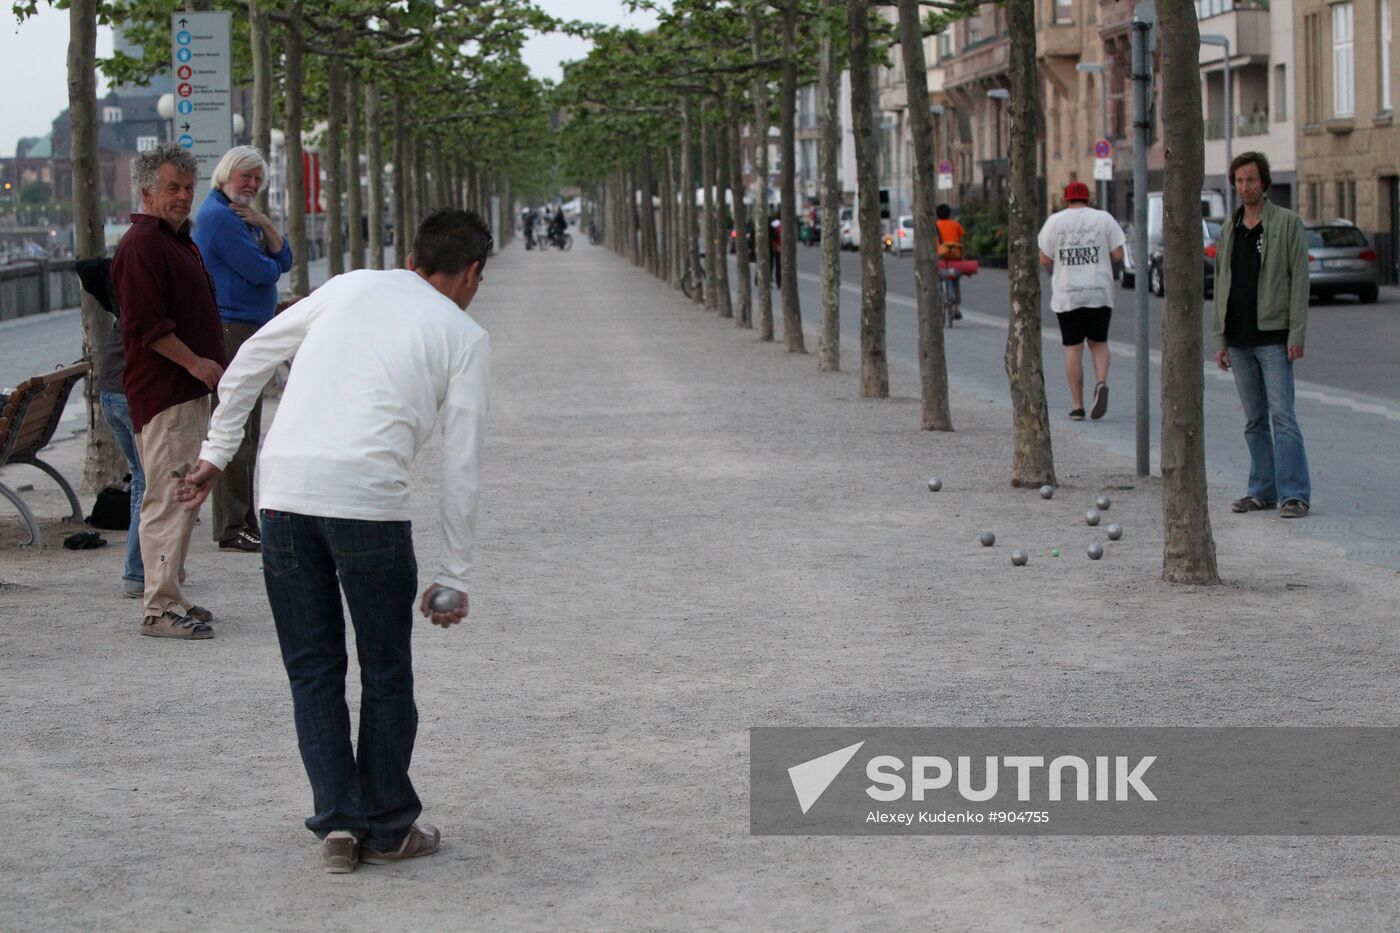 Citizens playing petanque on an embankment in Dusseldorf